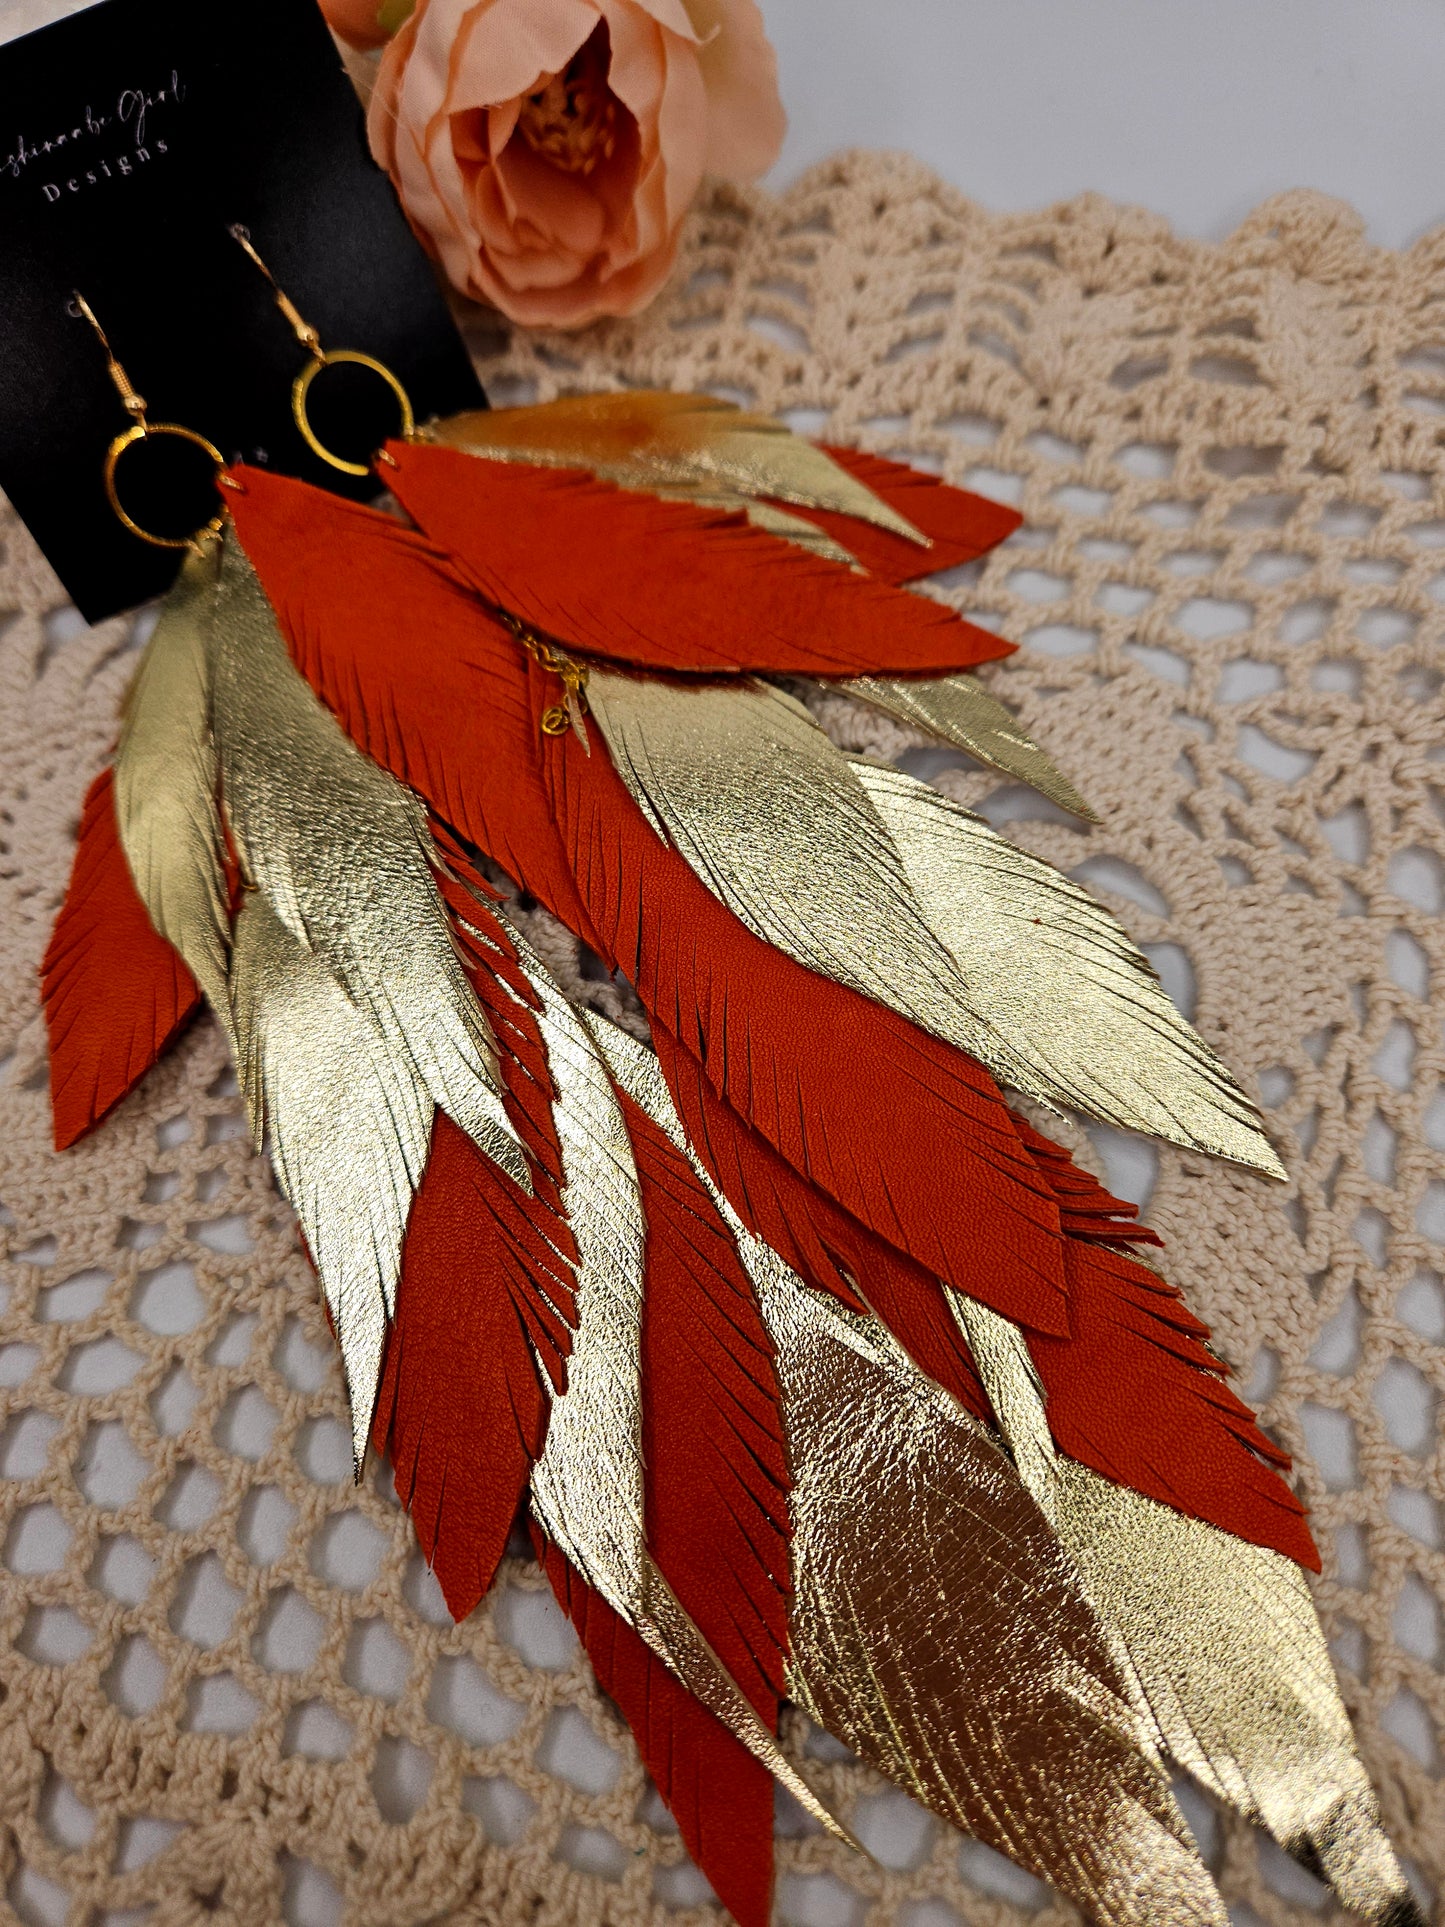 Extra Long Gold and orange Leather Feather Statement Earrings